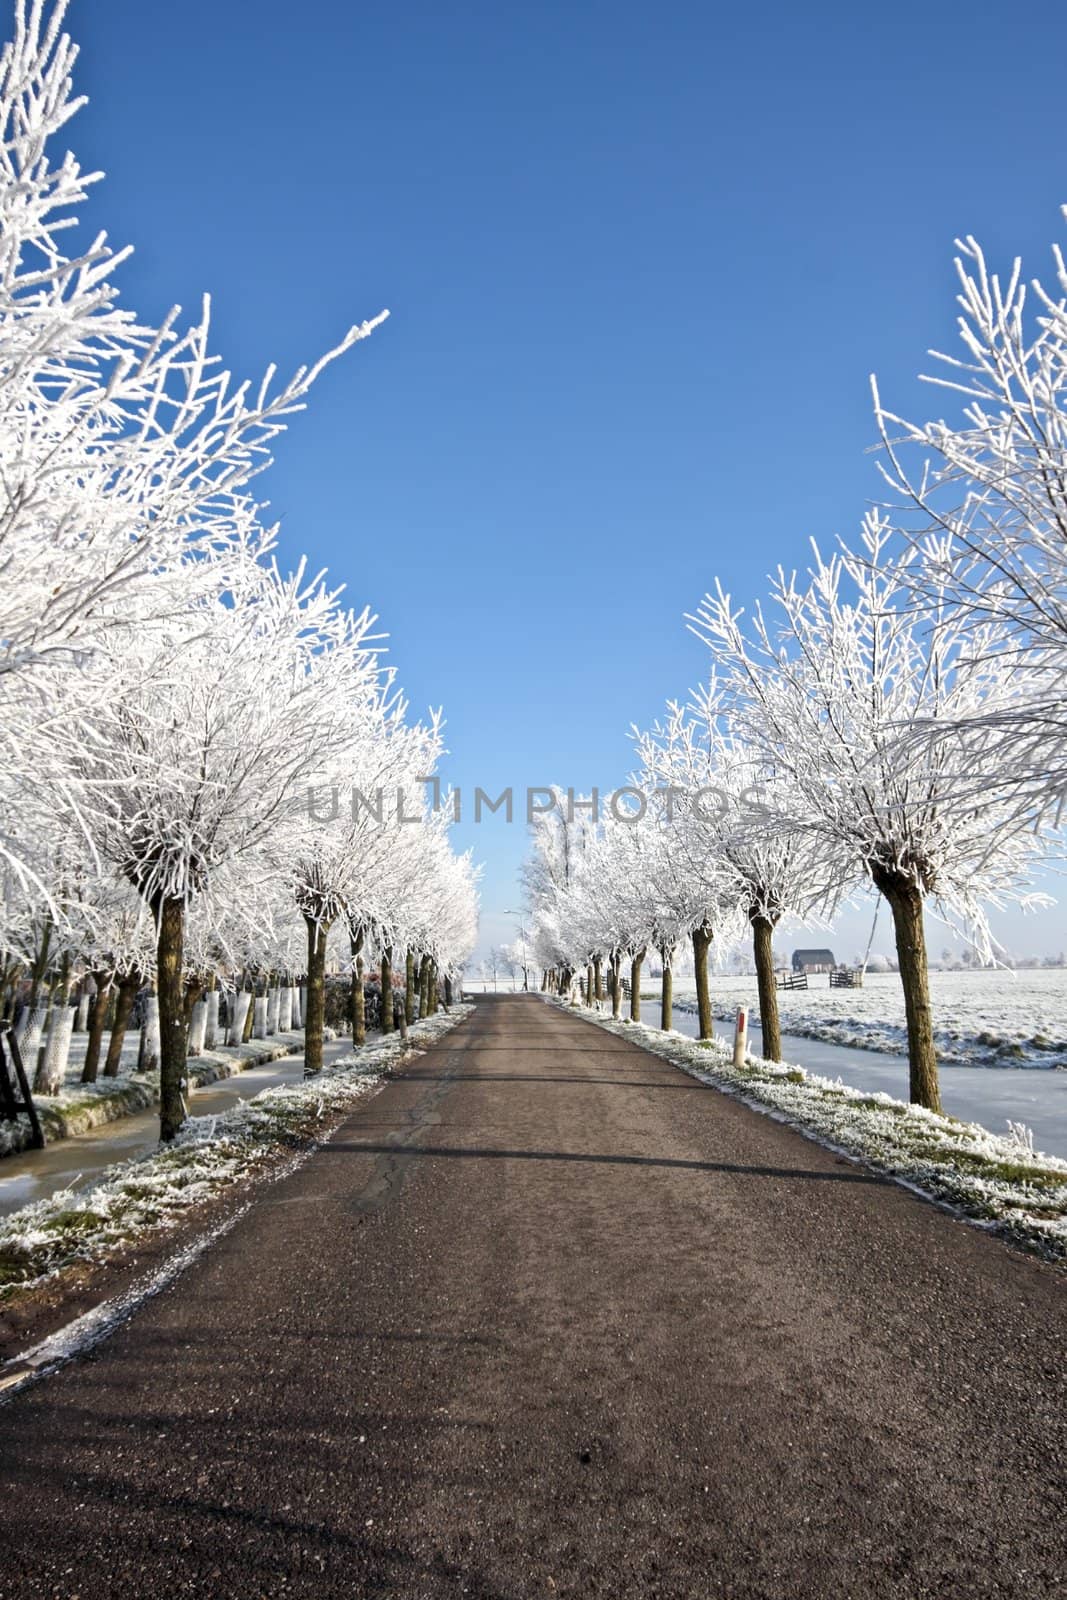 Countryroad in wintertime by devy